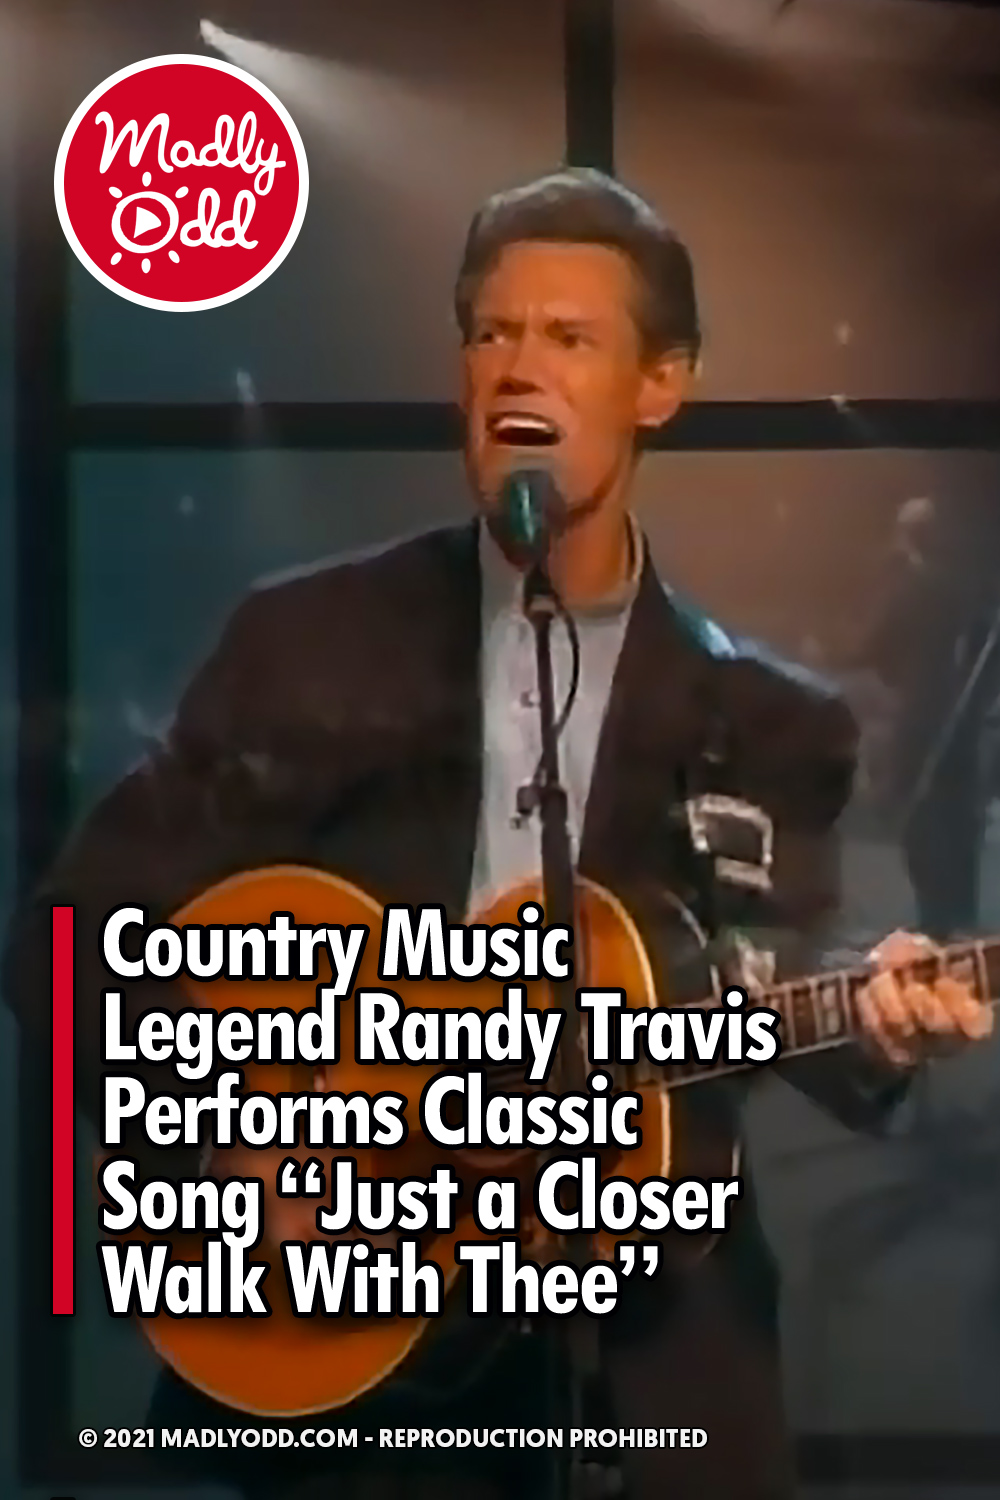 Country Music Legend Randy Travis Performs Classic Song “Just a Closer Walk With Thee”